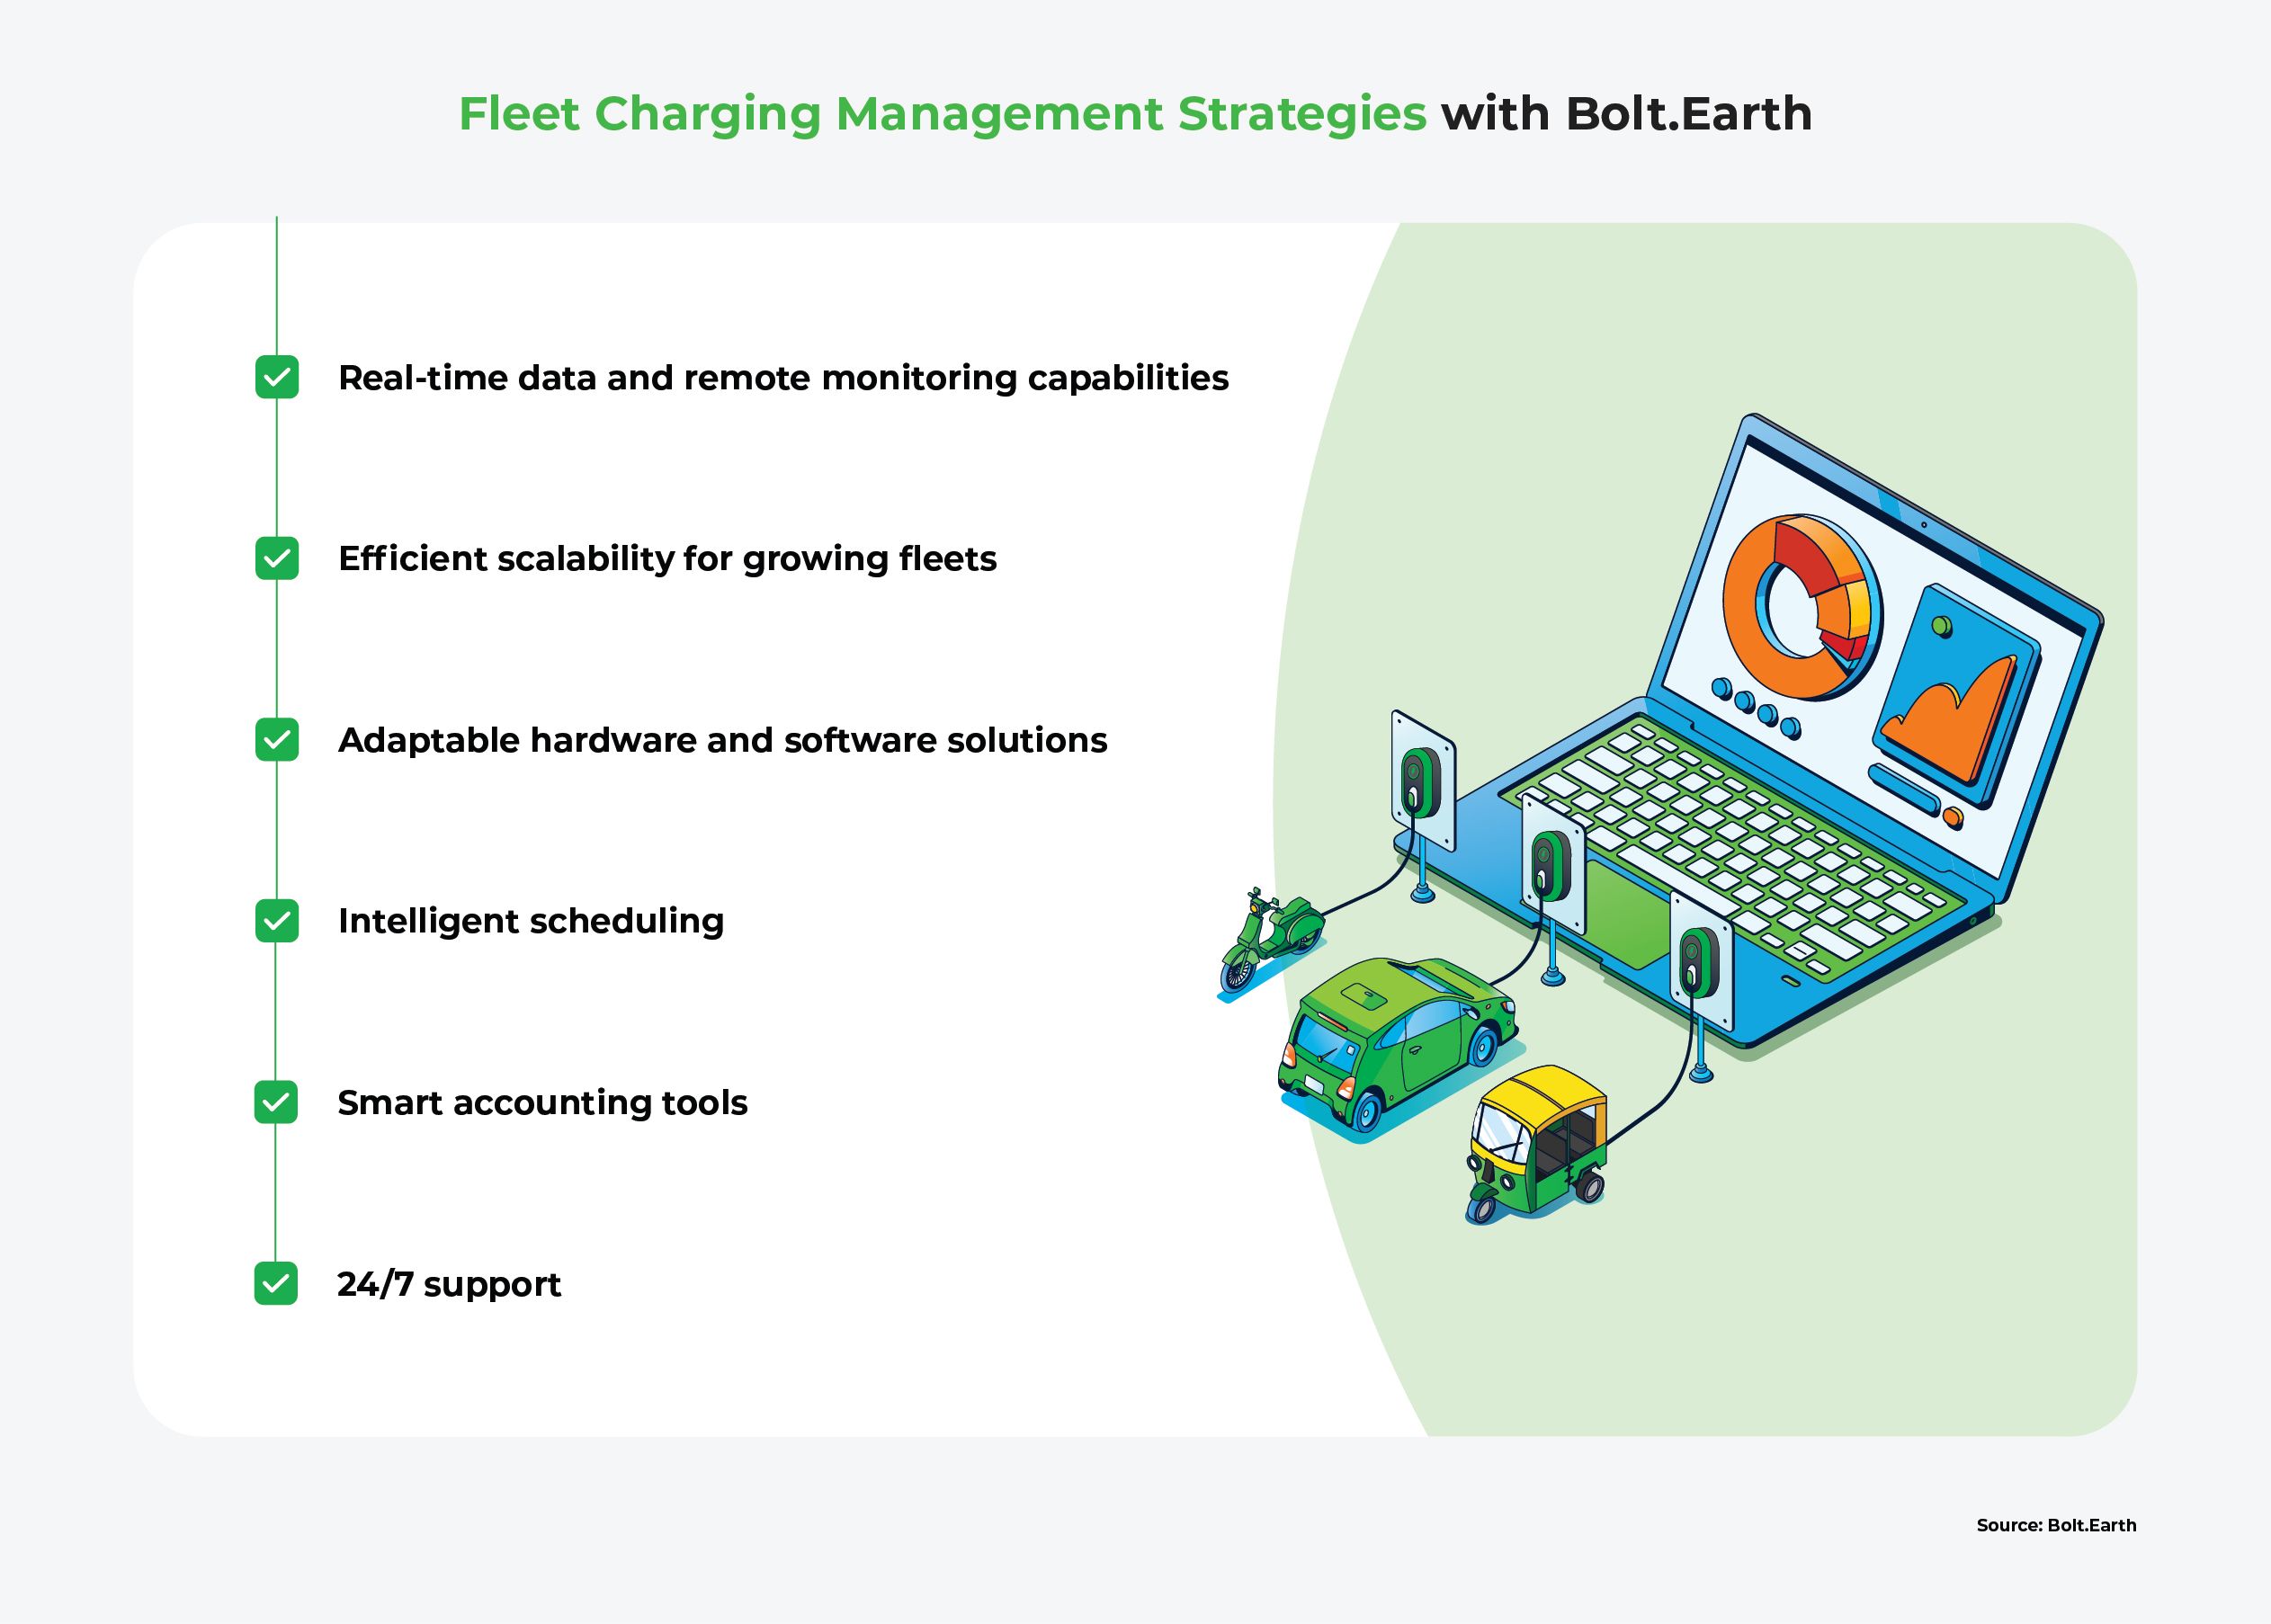 List of solutions offered by Bolt.Earth's fleet charging demand strategies